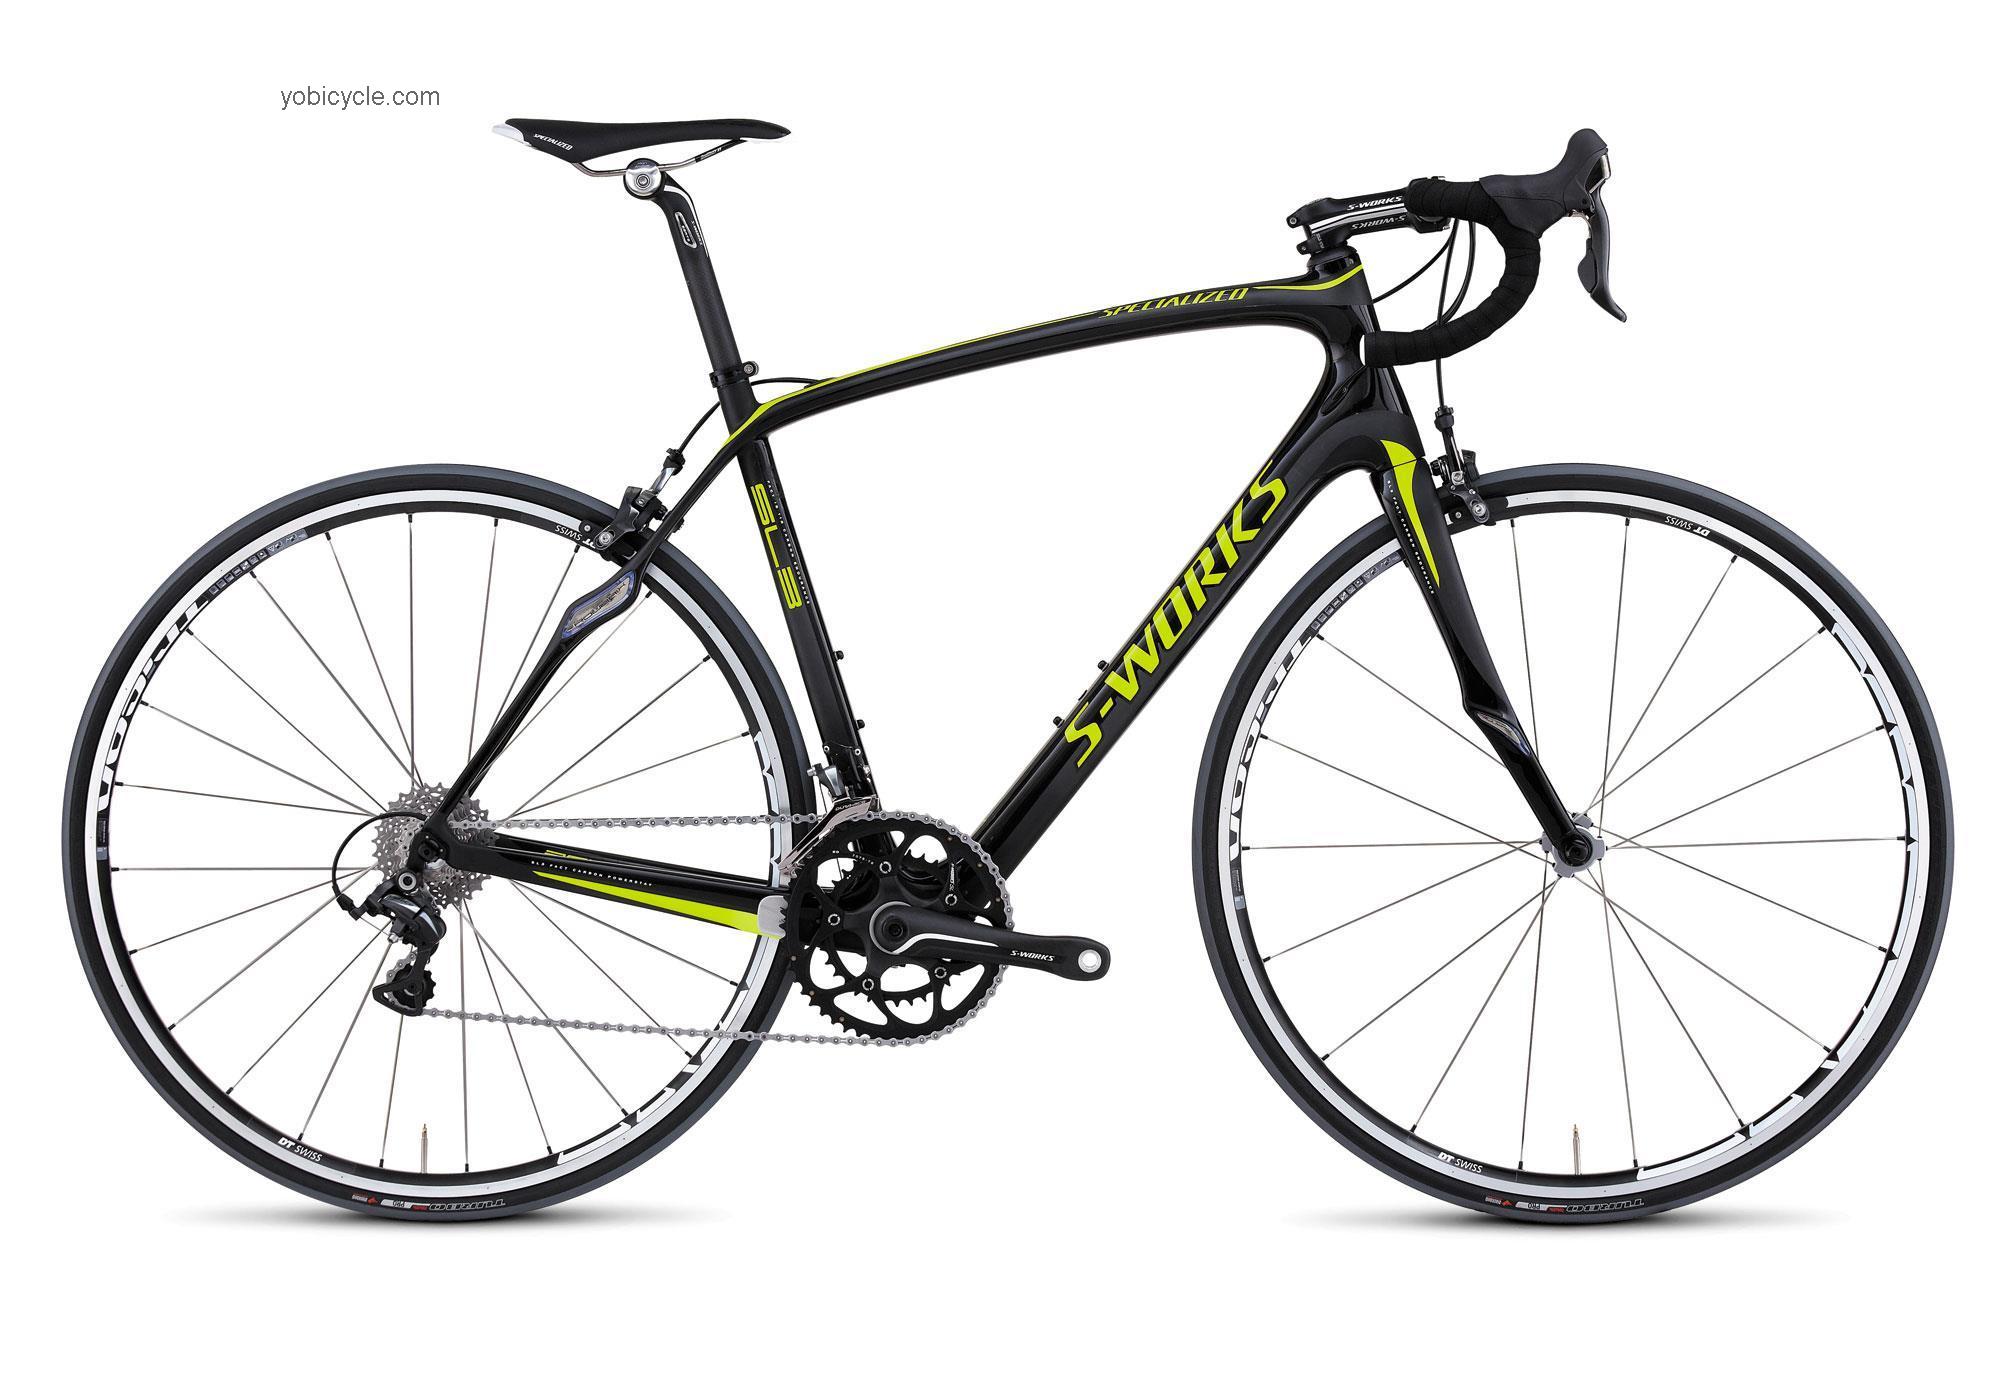 Specialized S-Works Roubaix SL3 Compact Dura-Ace competitors and comparison tool online specs and performance